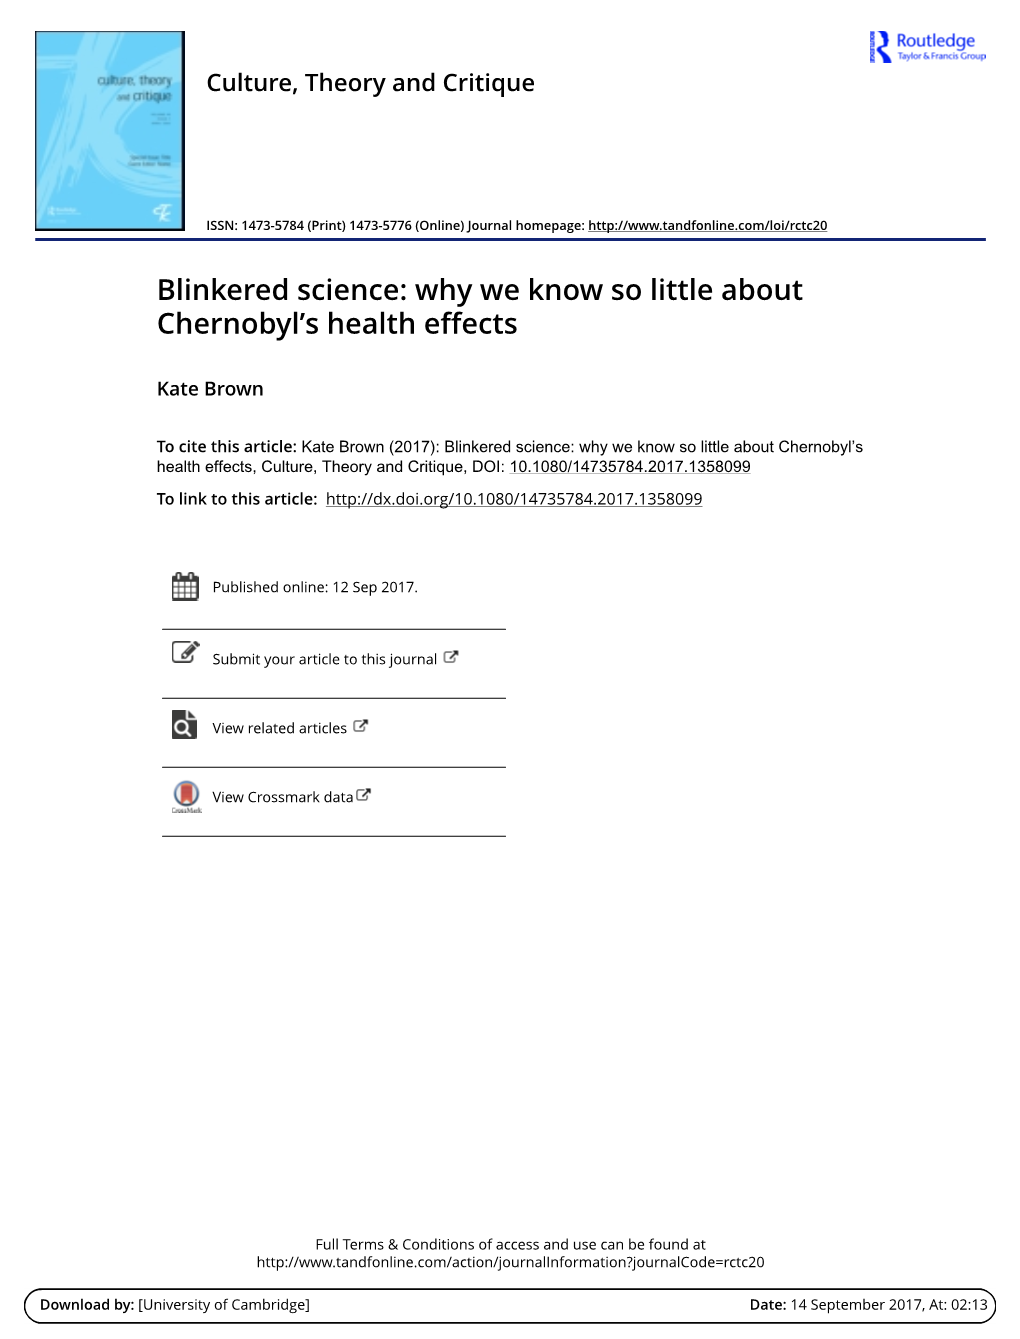 Blinkered Science: Why We Know So Little About Chernobyls Health Effects